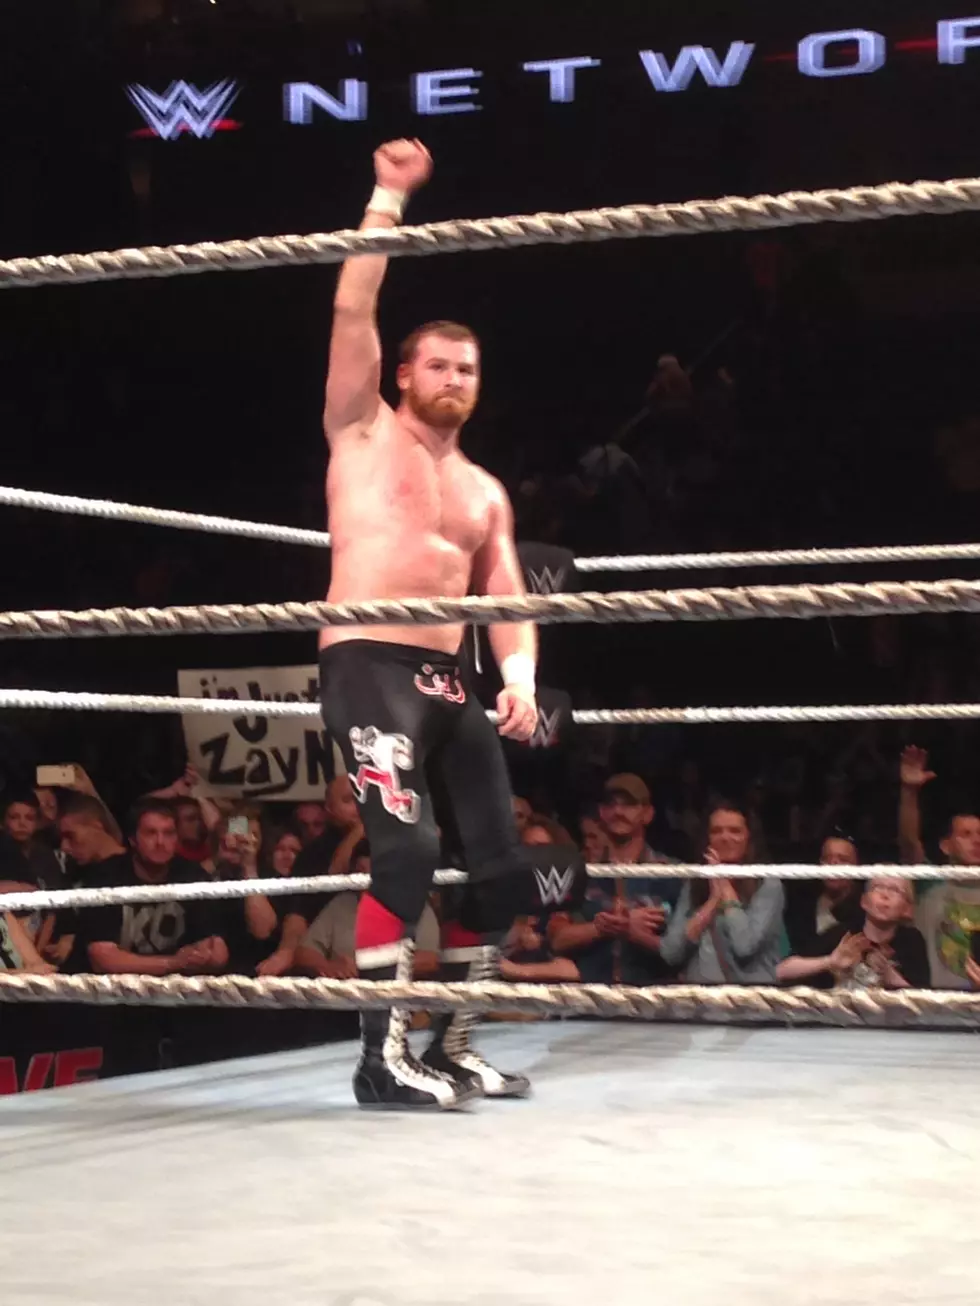 Sami Zayn Promises to Lay Down For Kevin Owens at WWE Fastlane